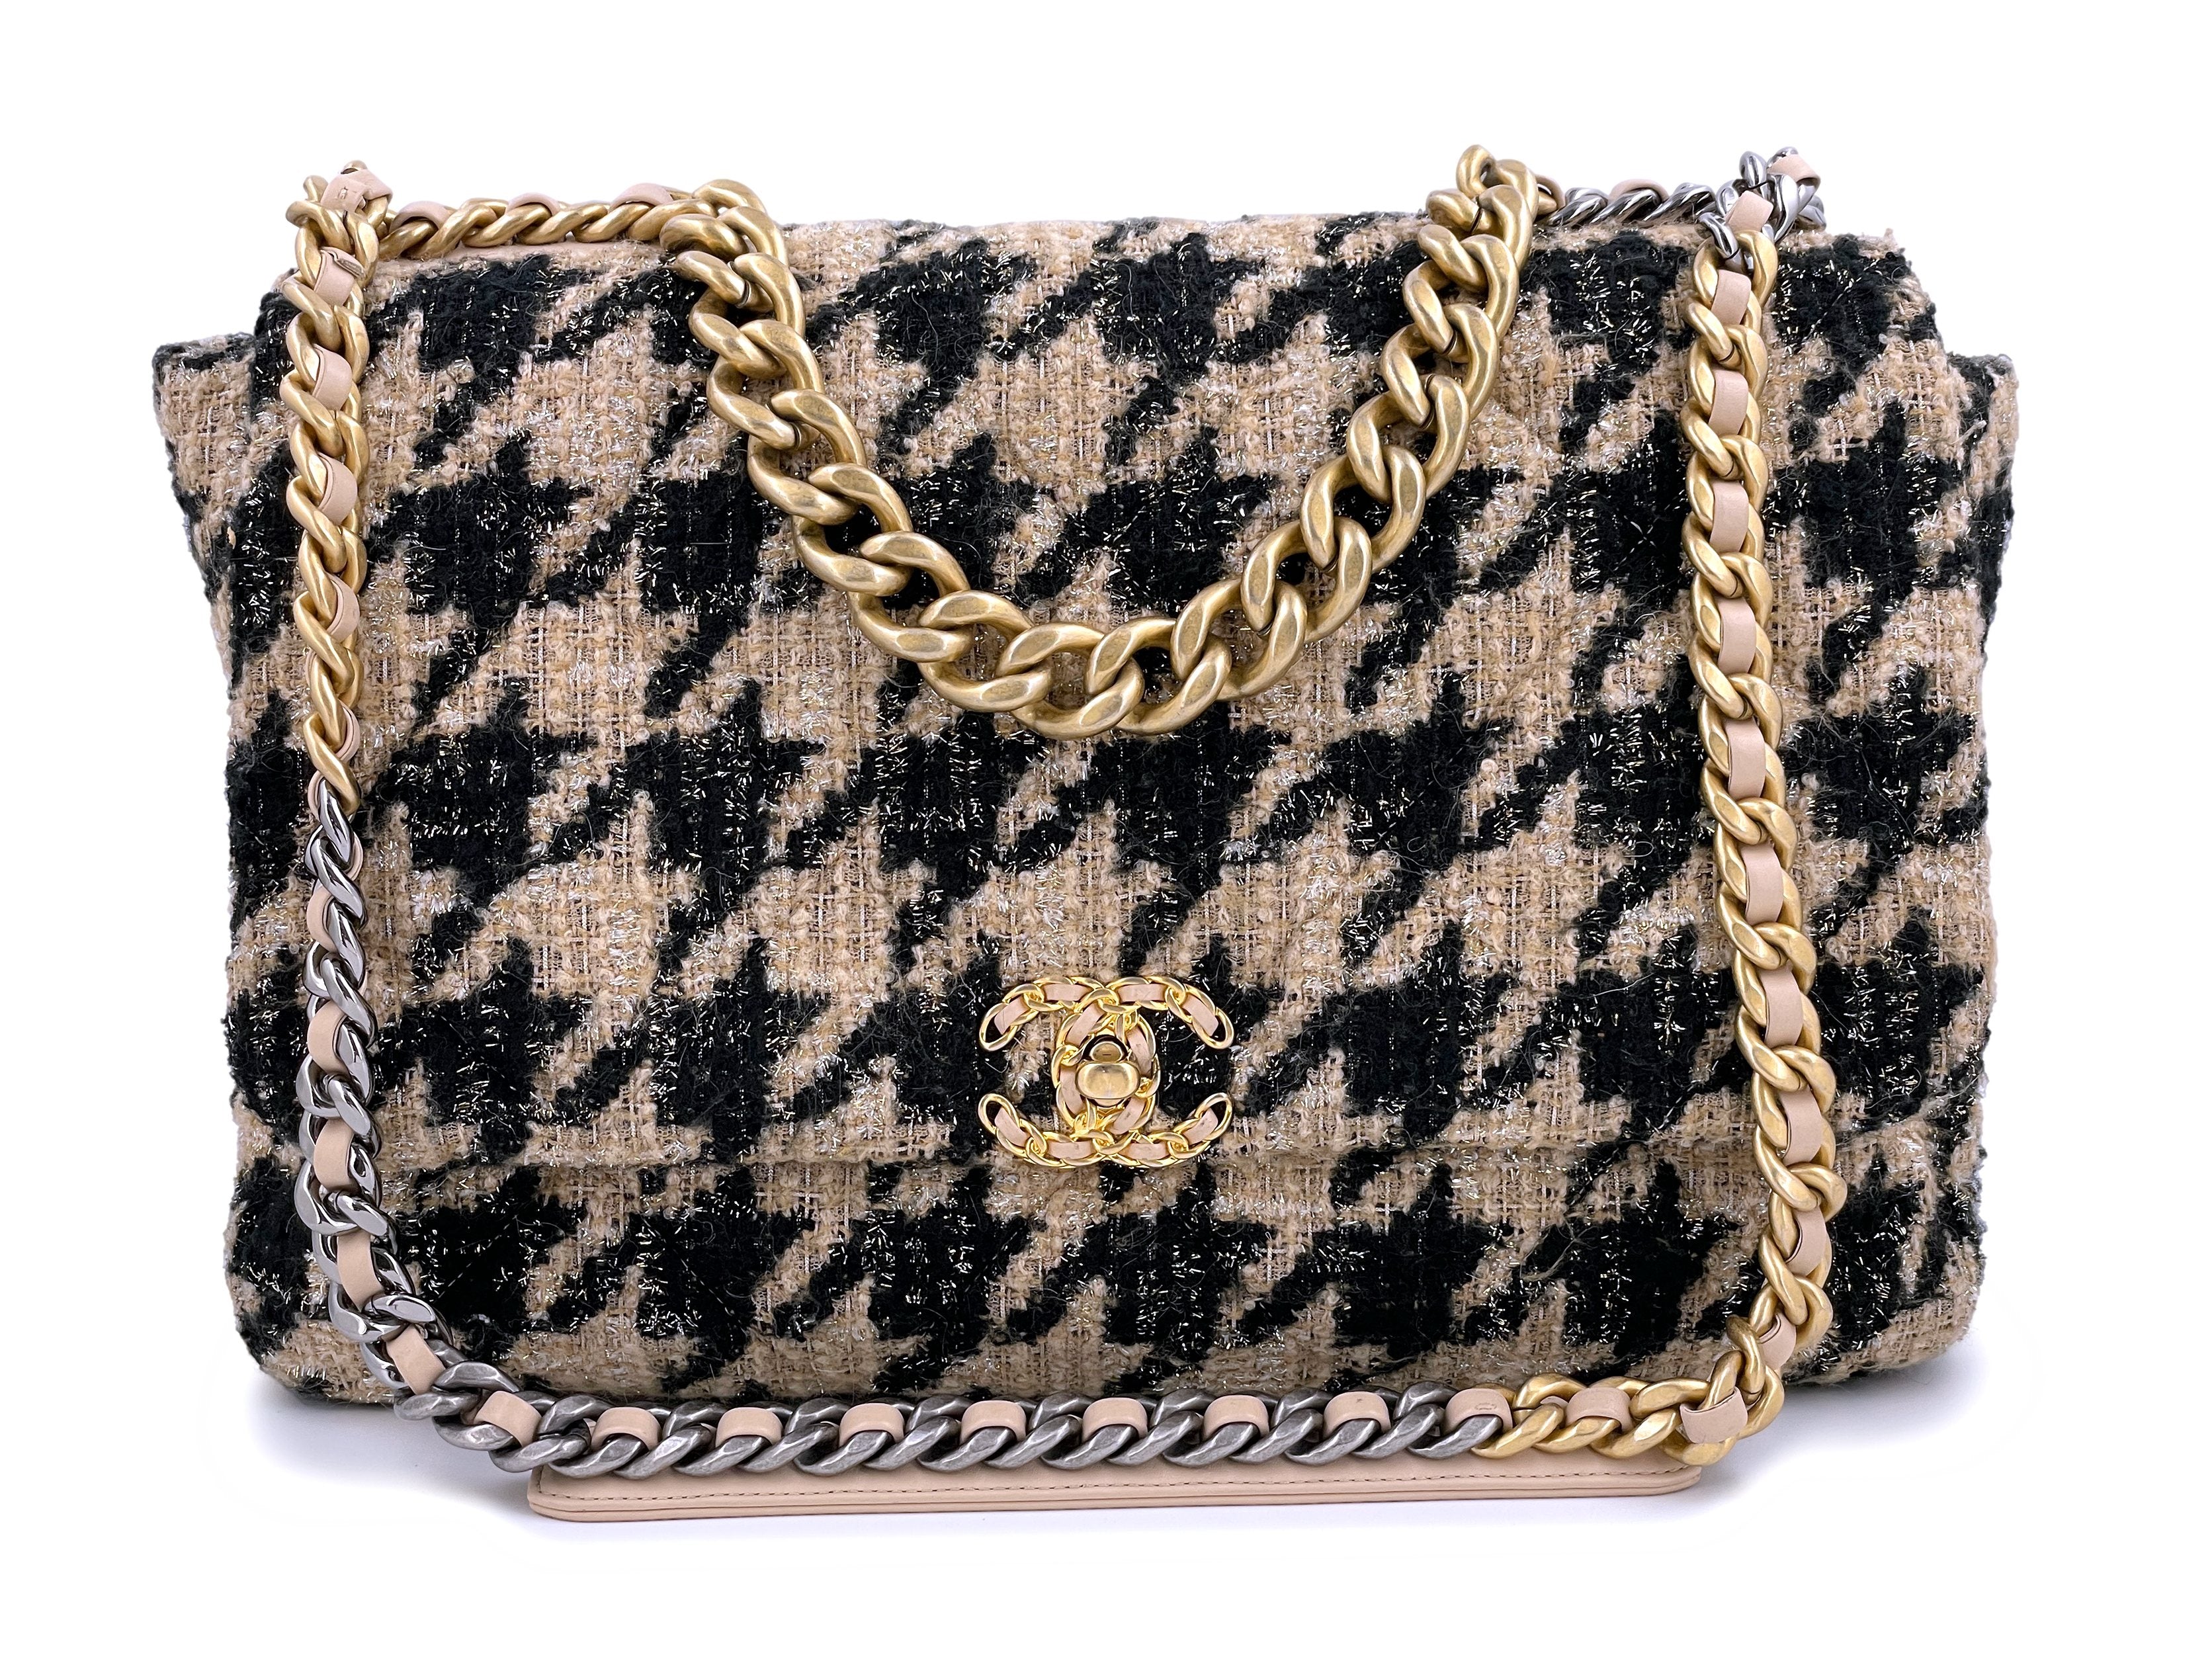 Chanel Beige, Black And Silver Houndstooth Tweed Maxi 19 Flap